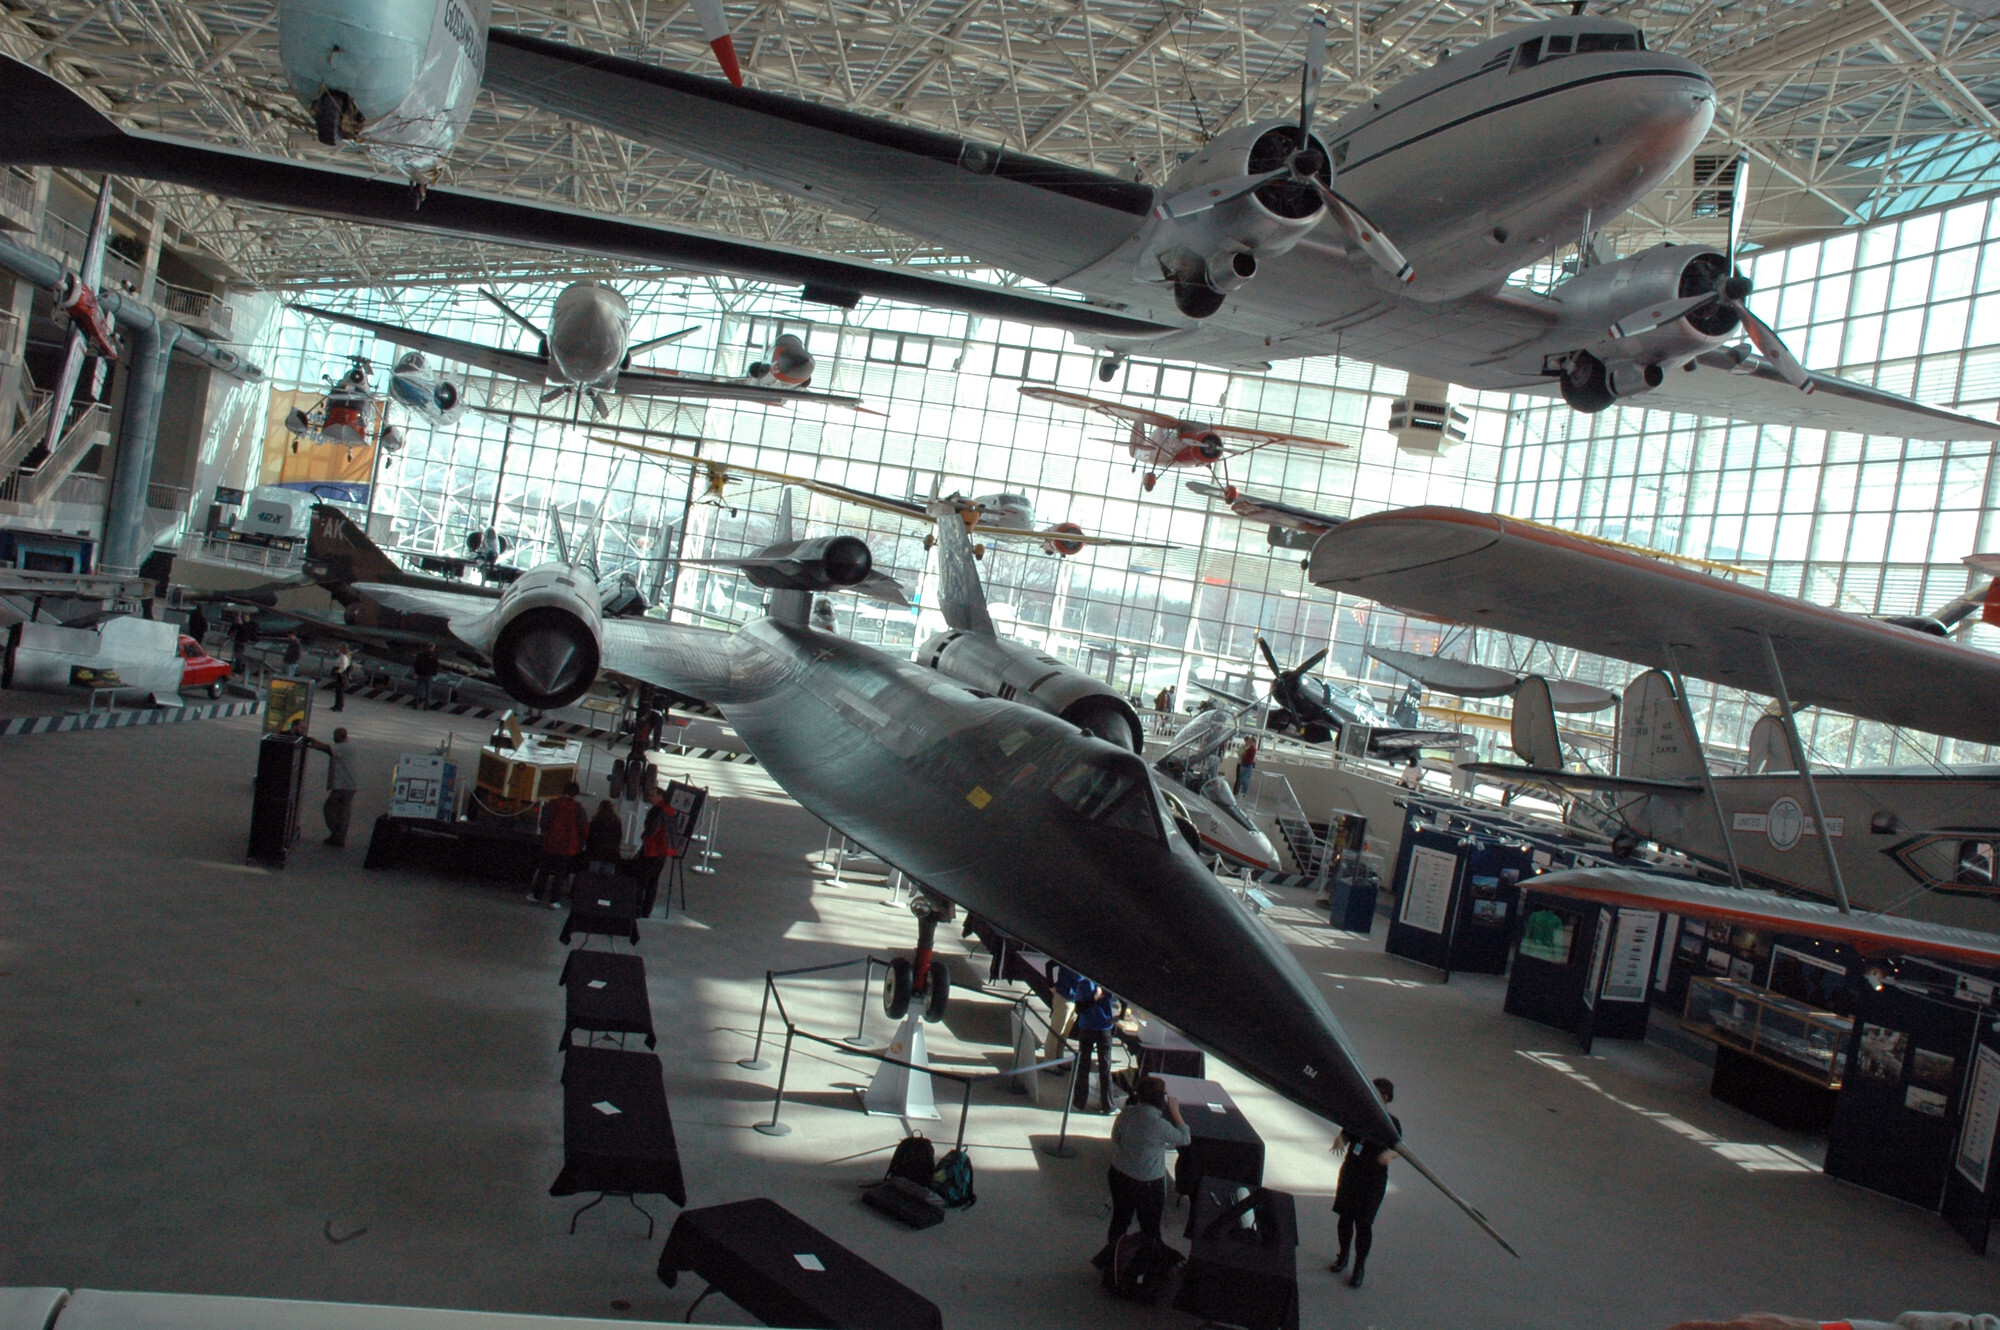 Museum of Flight by James Brooks via Flickr/Creative Commons